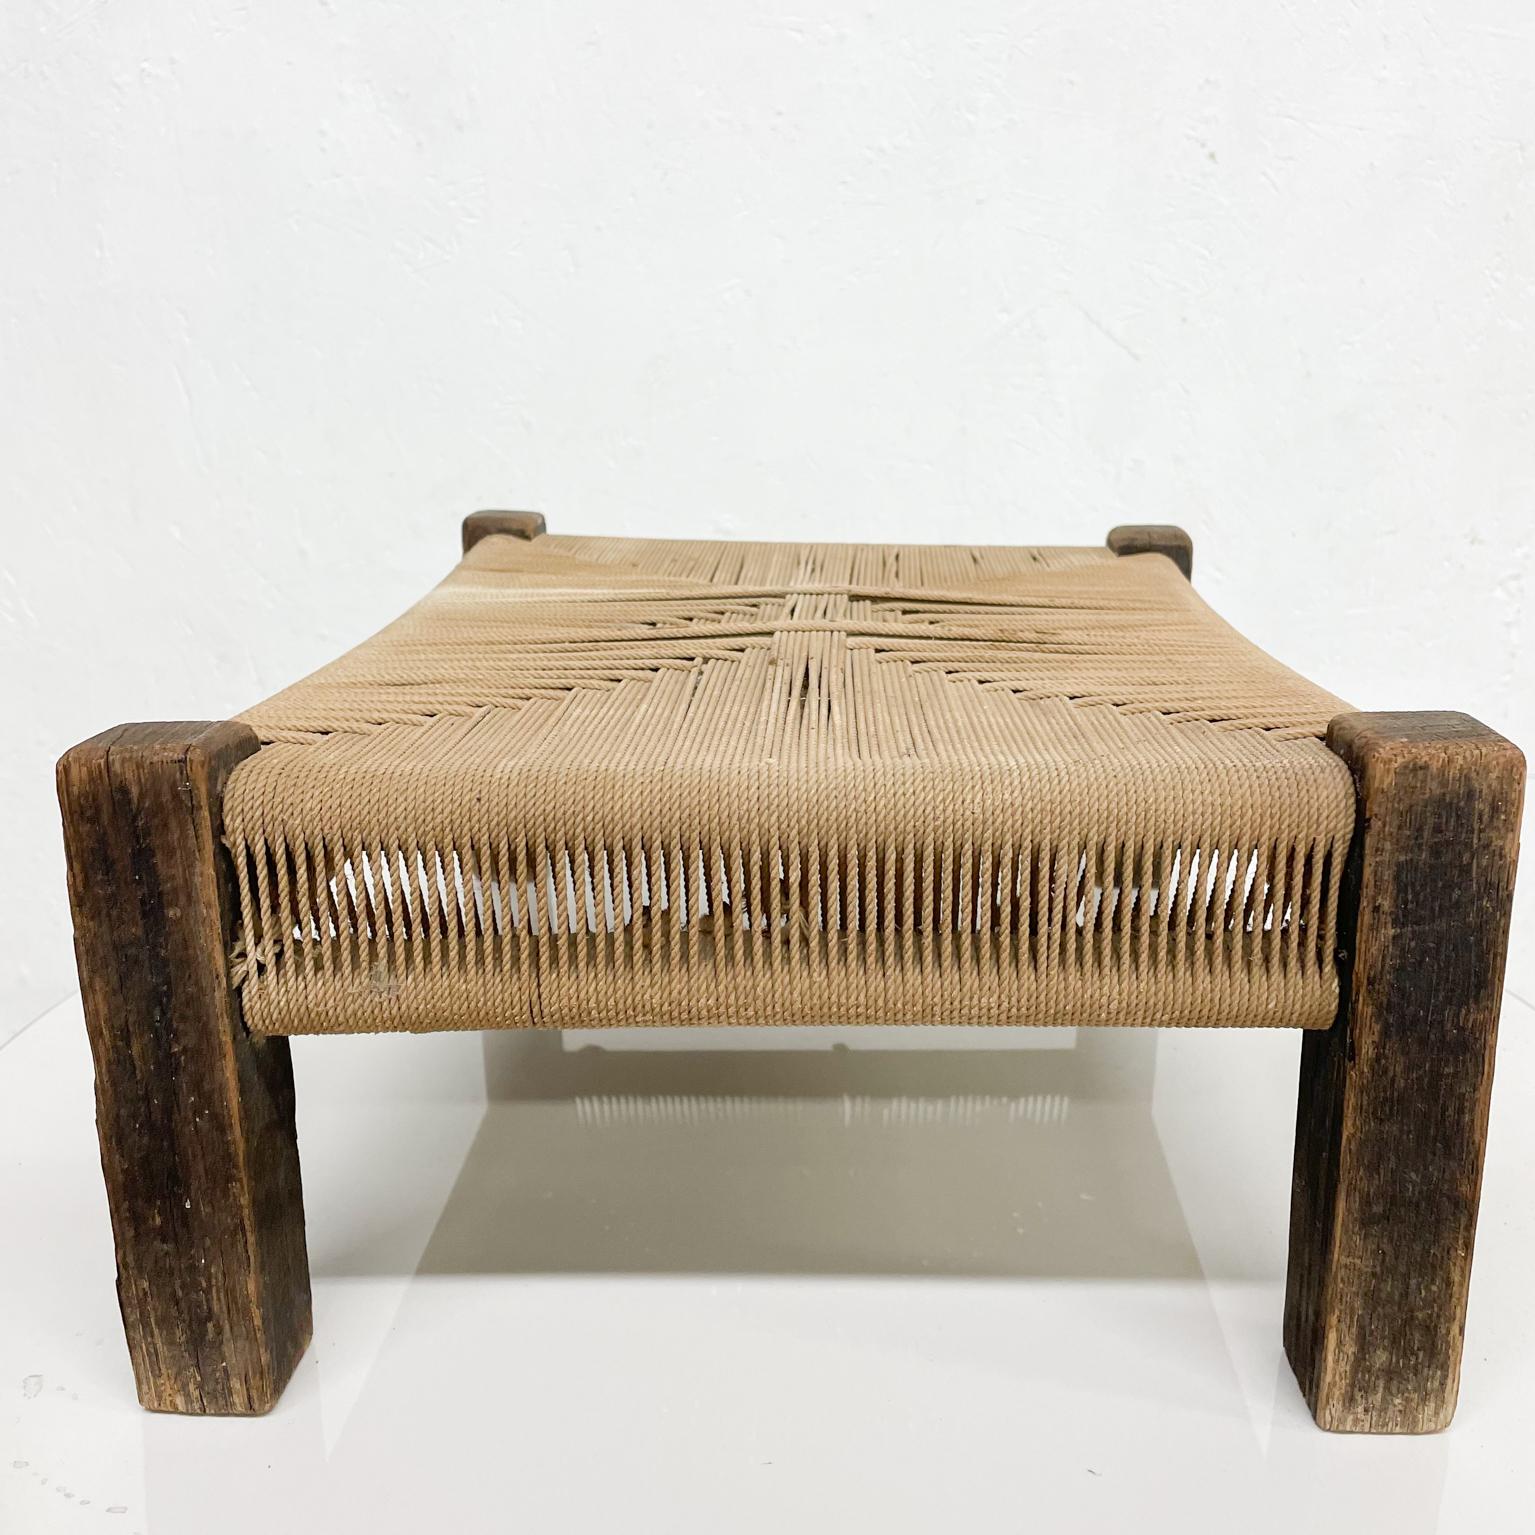 Rustic Low-Profile Stool in Woven Rope on Wood Frame Arts & Crafts In Good Condition For Sale In Chula Vista, CA